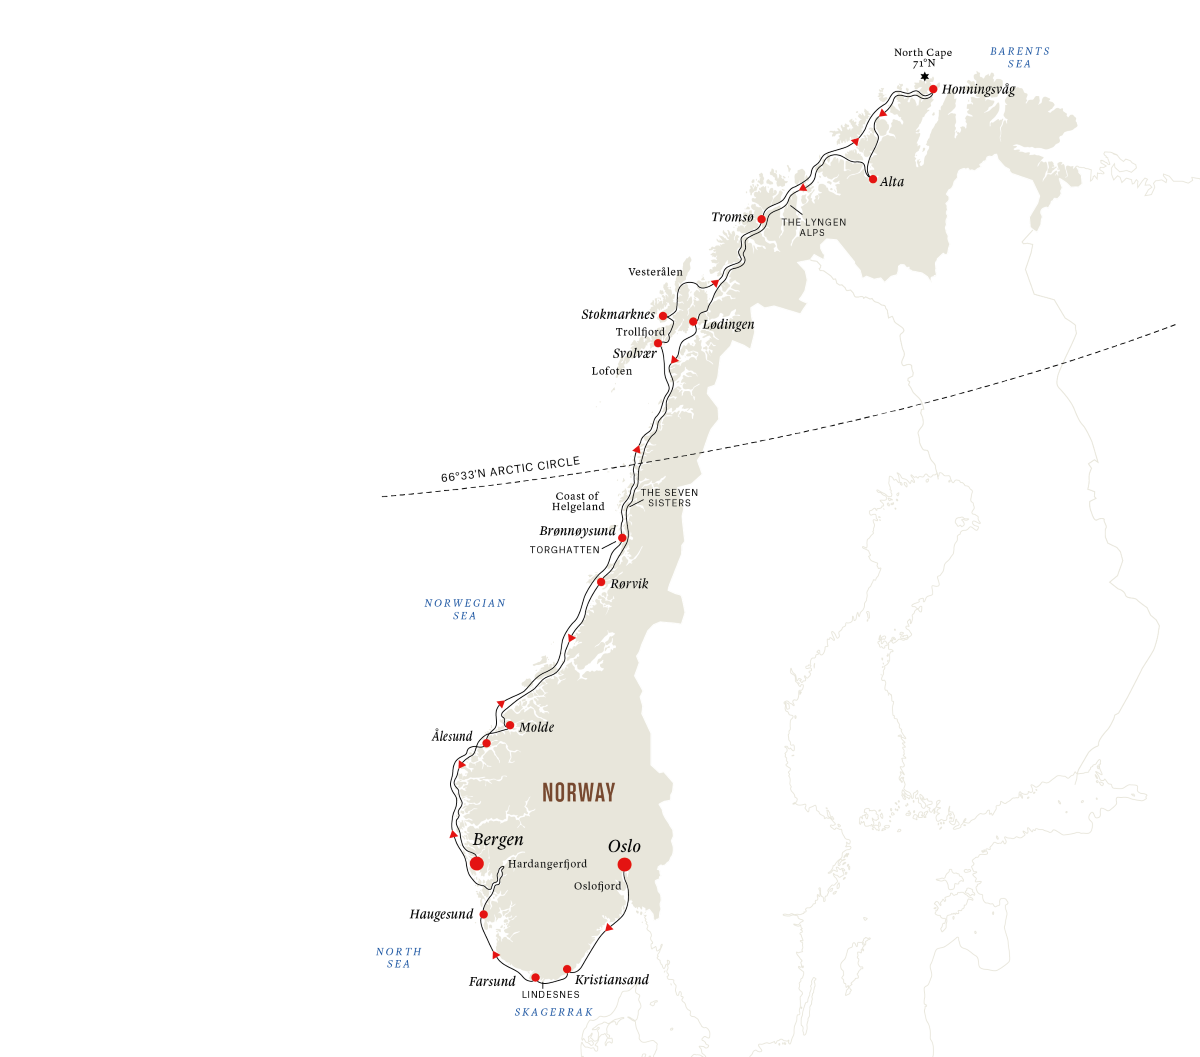 The North Cape Express – Full Voyage